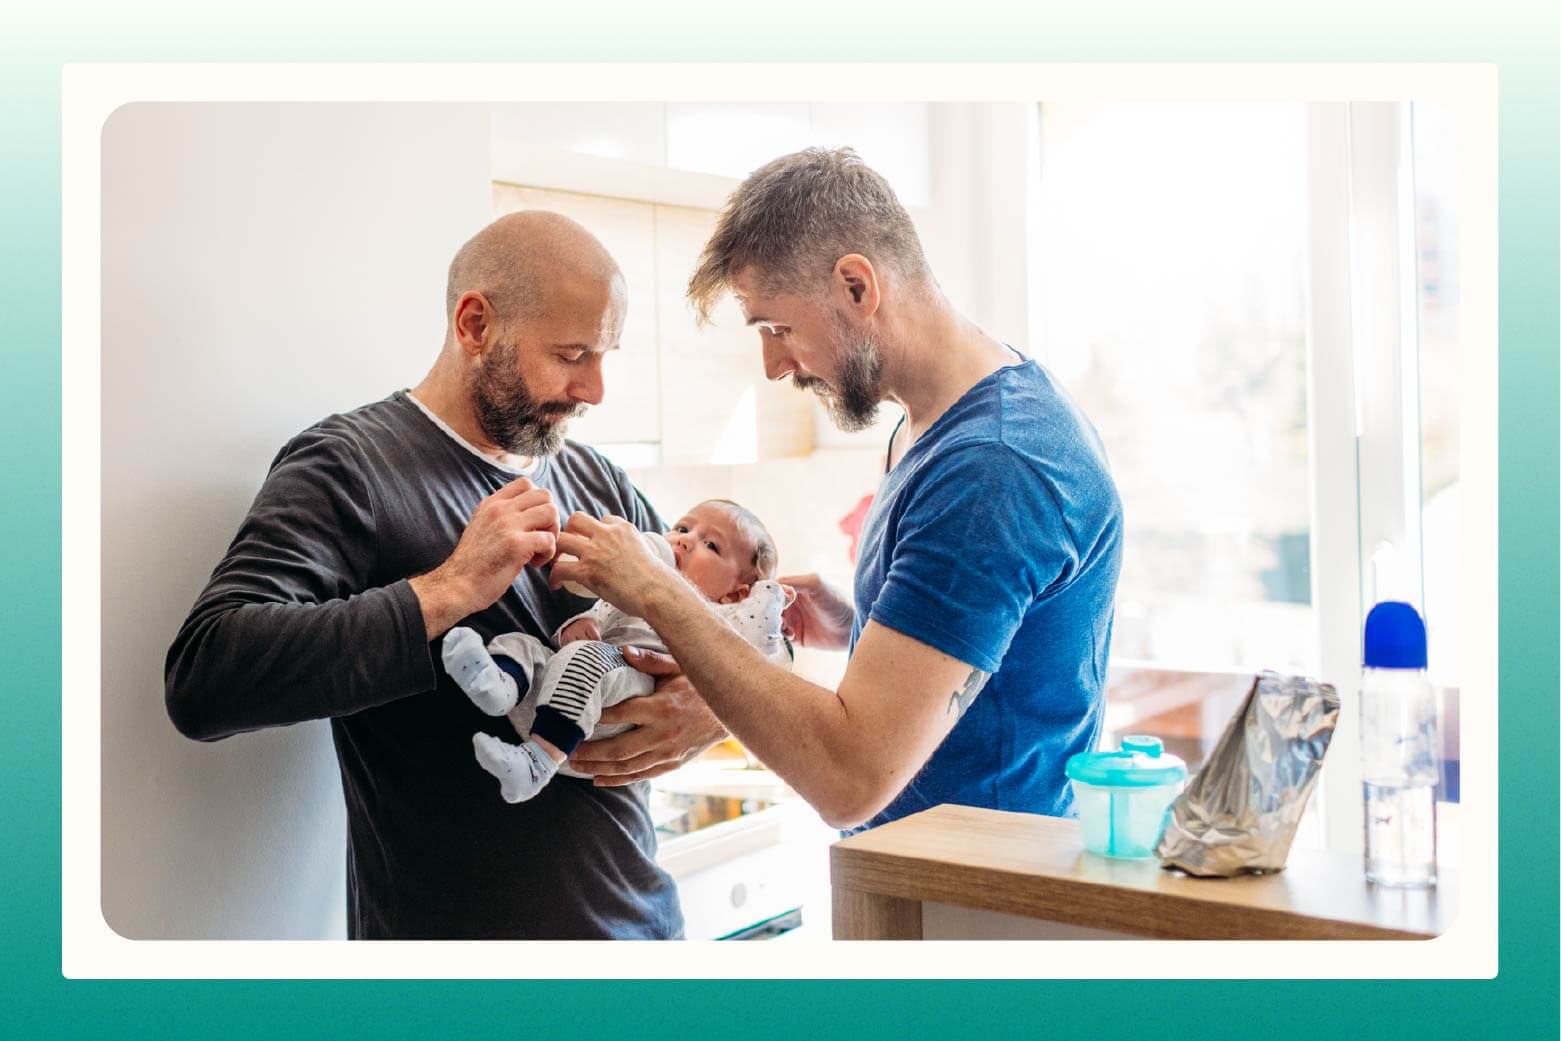 One man cradling baby in his arm while second man feeds the baby a bottle